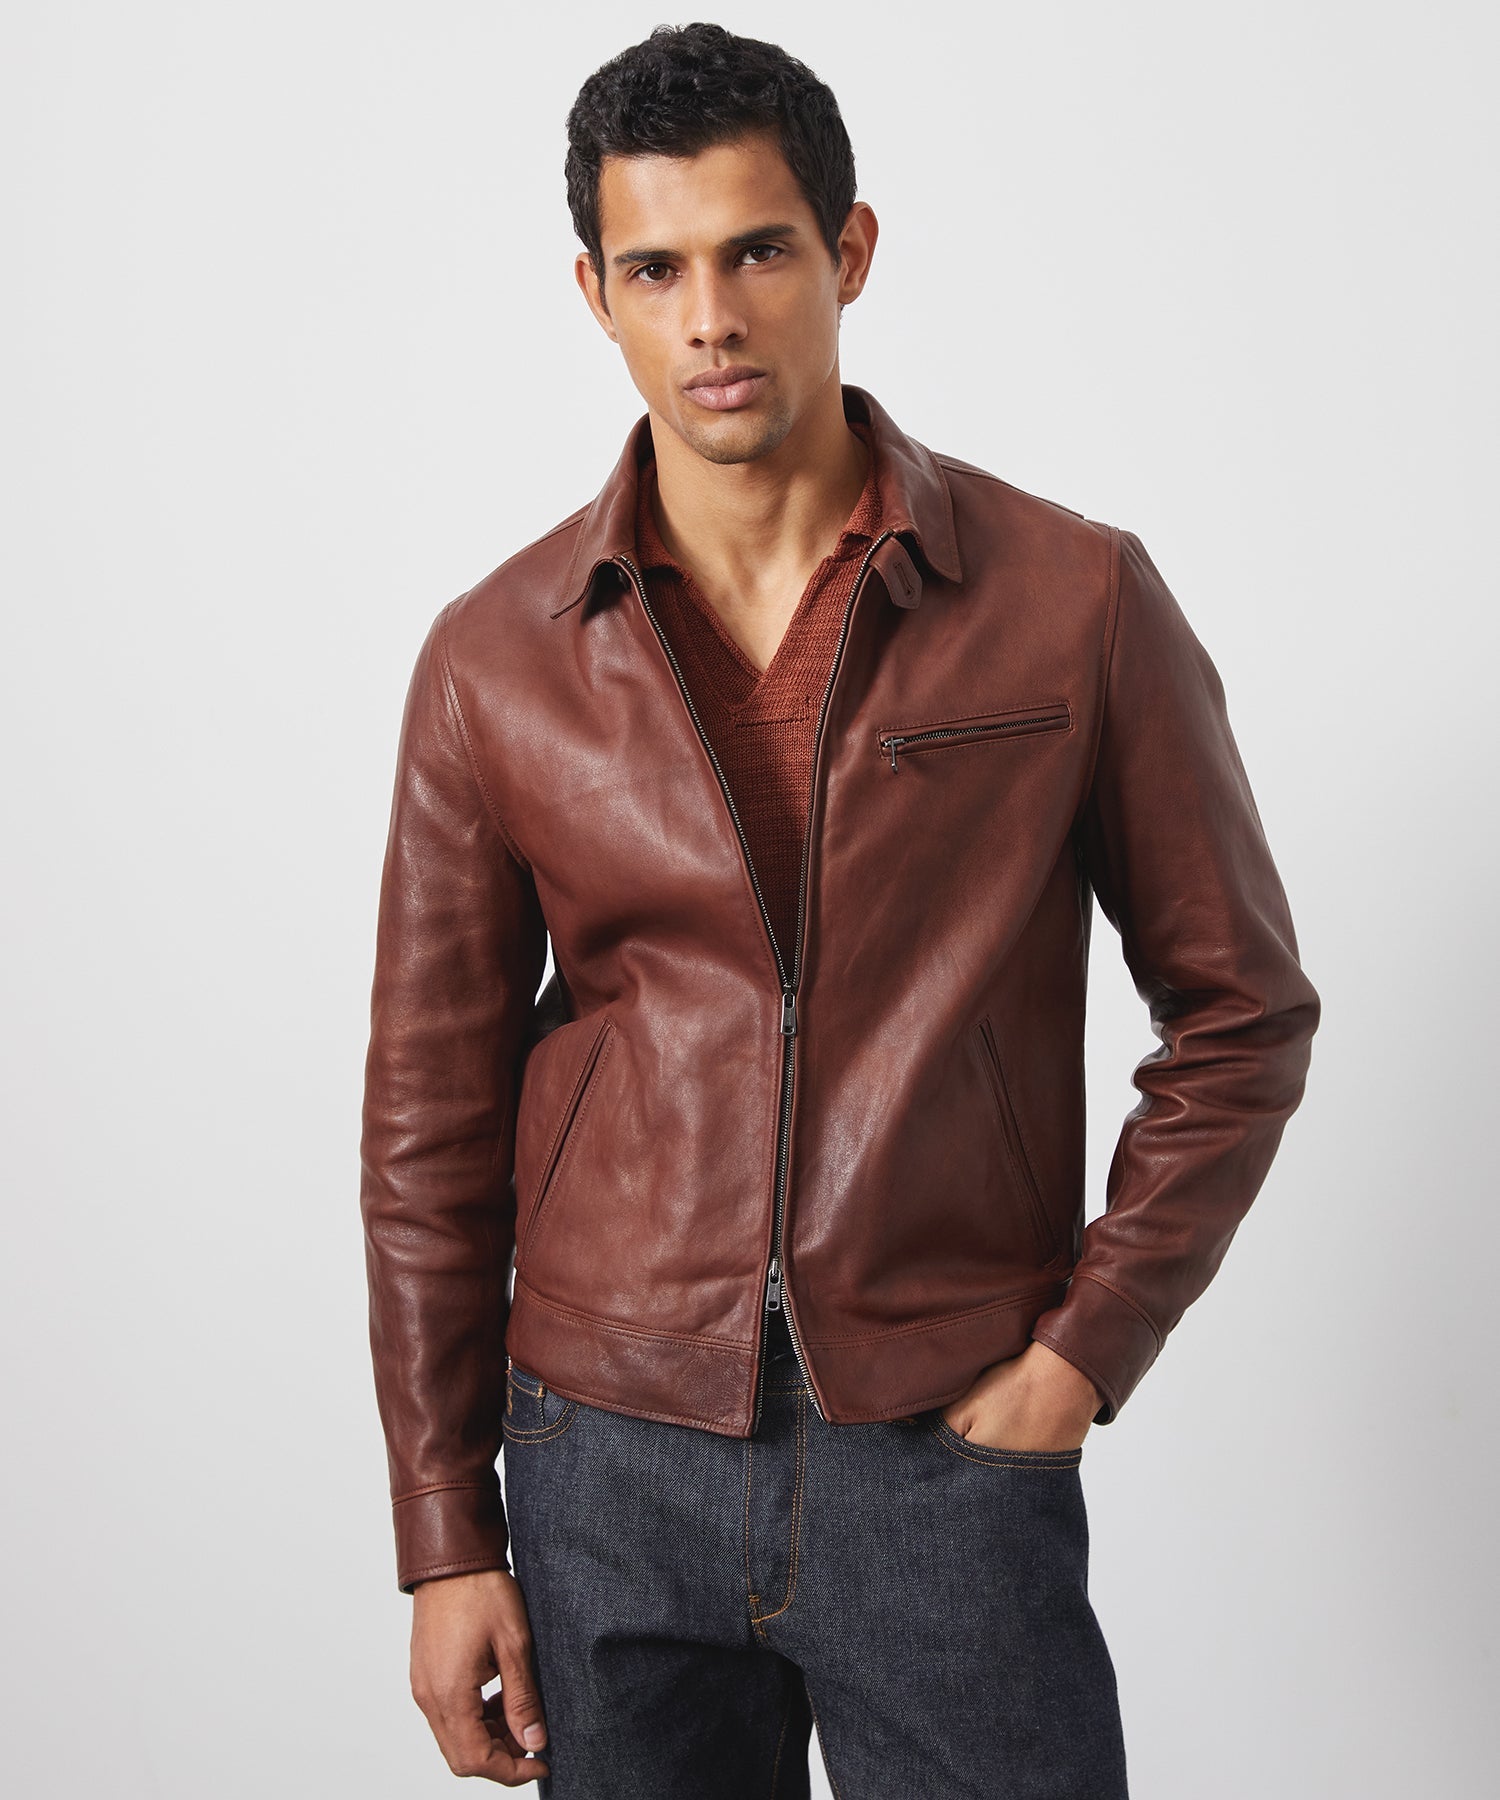 Italian Burnished Leather Dean Jacket in Brown